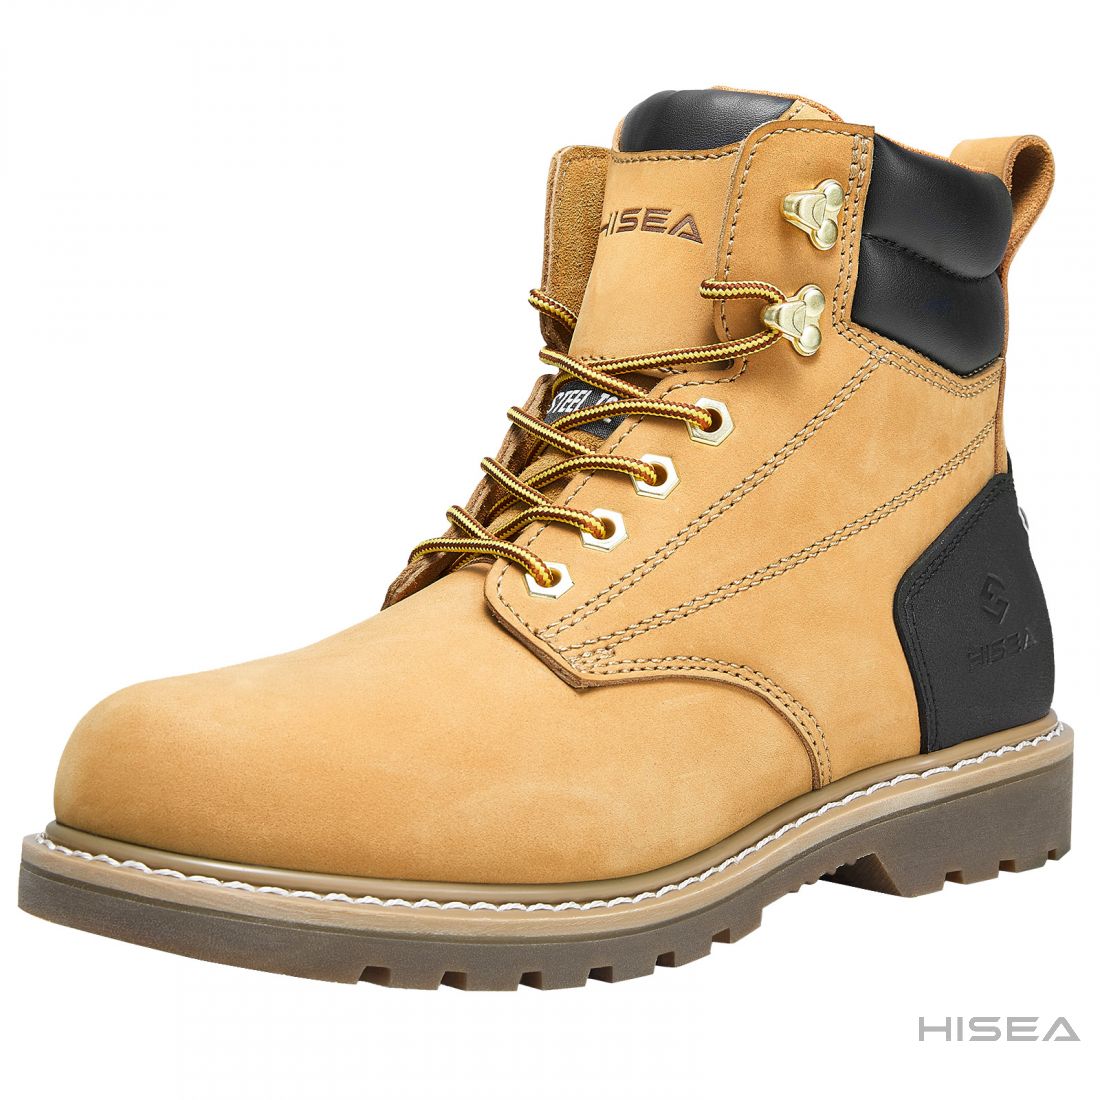 Men's Safety Working Boots